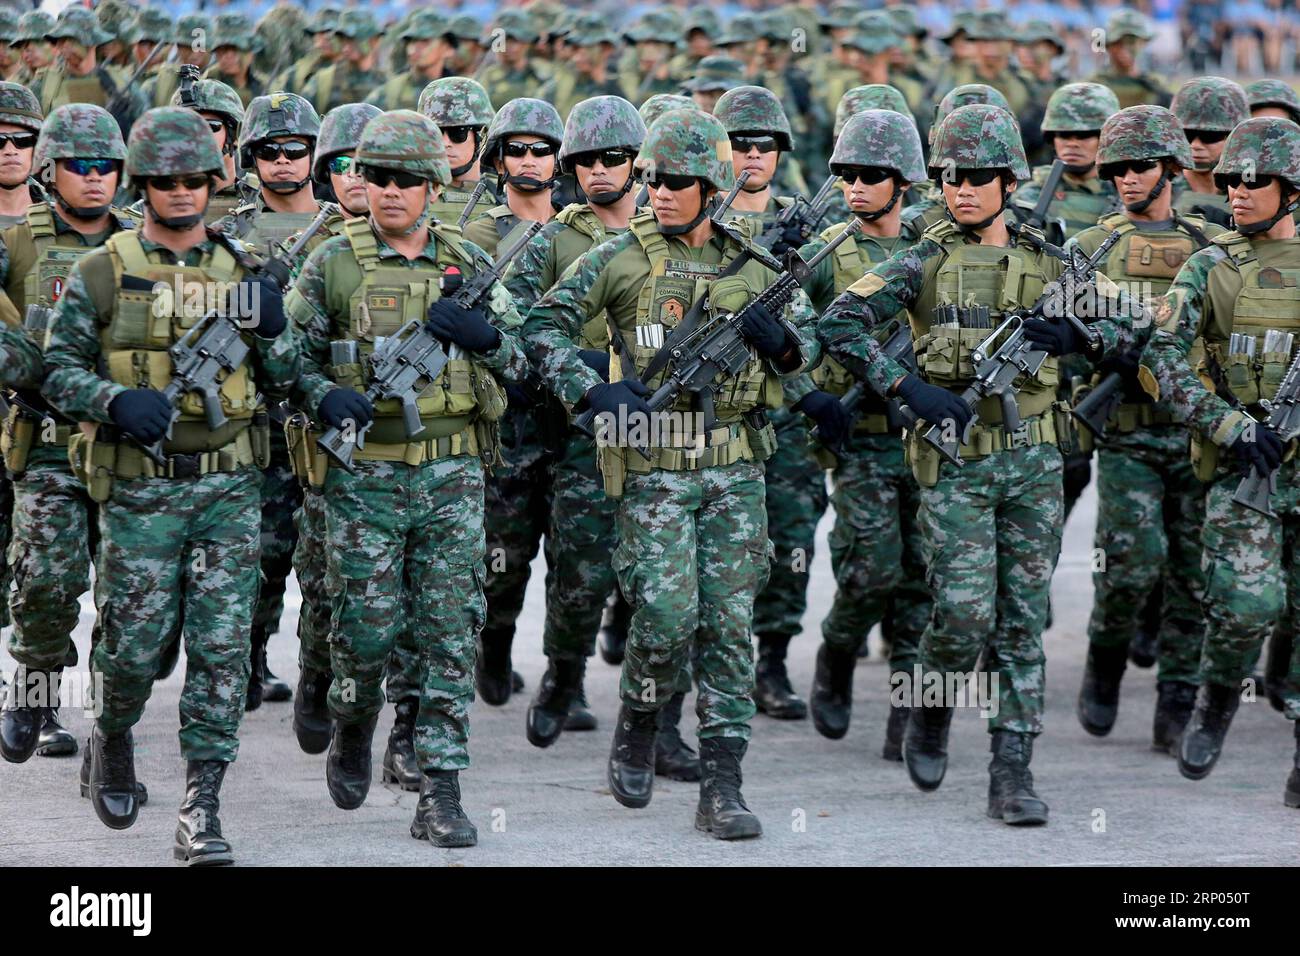 (180419) -- QUEZON CITY, April 19, 2018 -- Members of the Special Action Force of the Philippine National Police (PNP-SAF) march during the PNP s command handover ceremony inside Camp Crame in Quezon City, the Philippines, April 19, 2018. Philippine President Rodrigo Duterte named Oscar Albayalde as the new head of the PNP on April 5 and the command handover ceremony was held here on Thursday.) (zjl) PHILIPPINES-QUEZON CITY-PNP-COMMAND-HANDOVER RouellexUmali PUBLICATIONxNOTxINxCHN Stock Photo